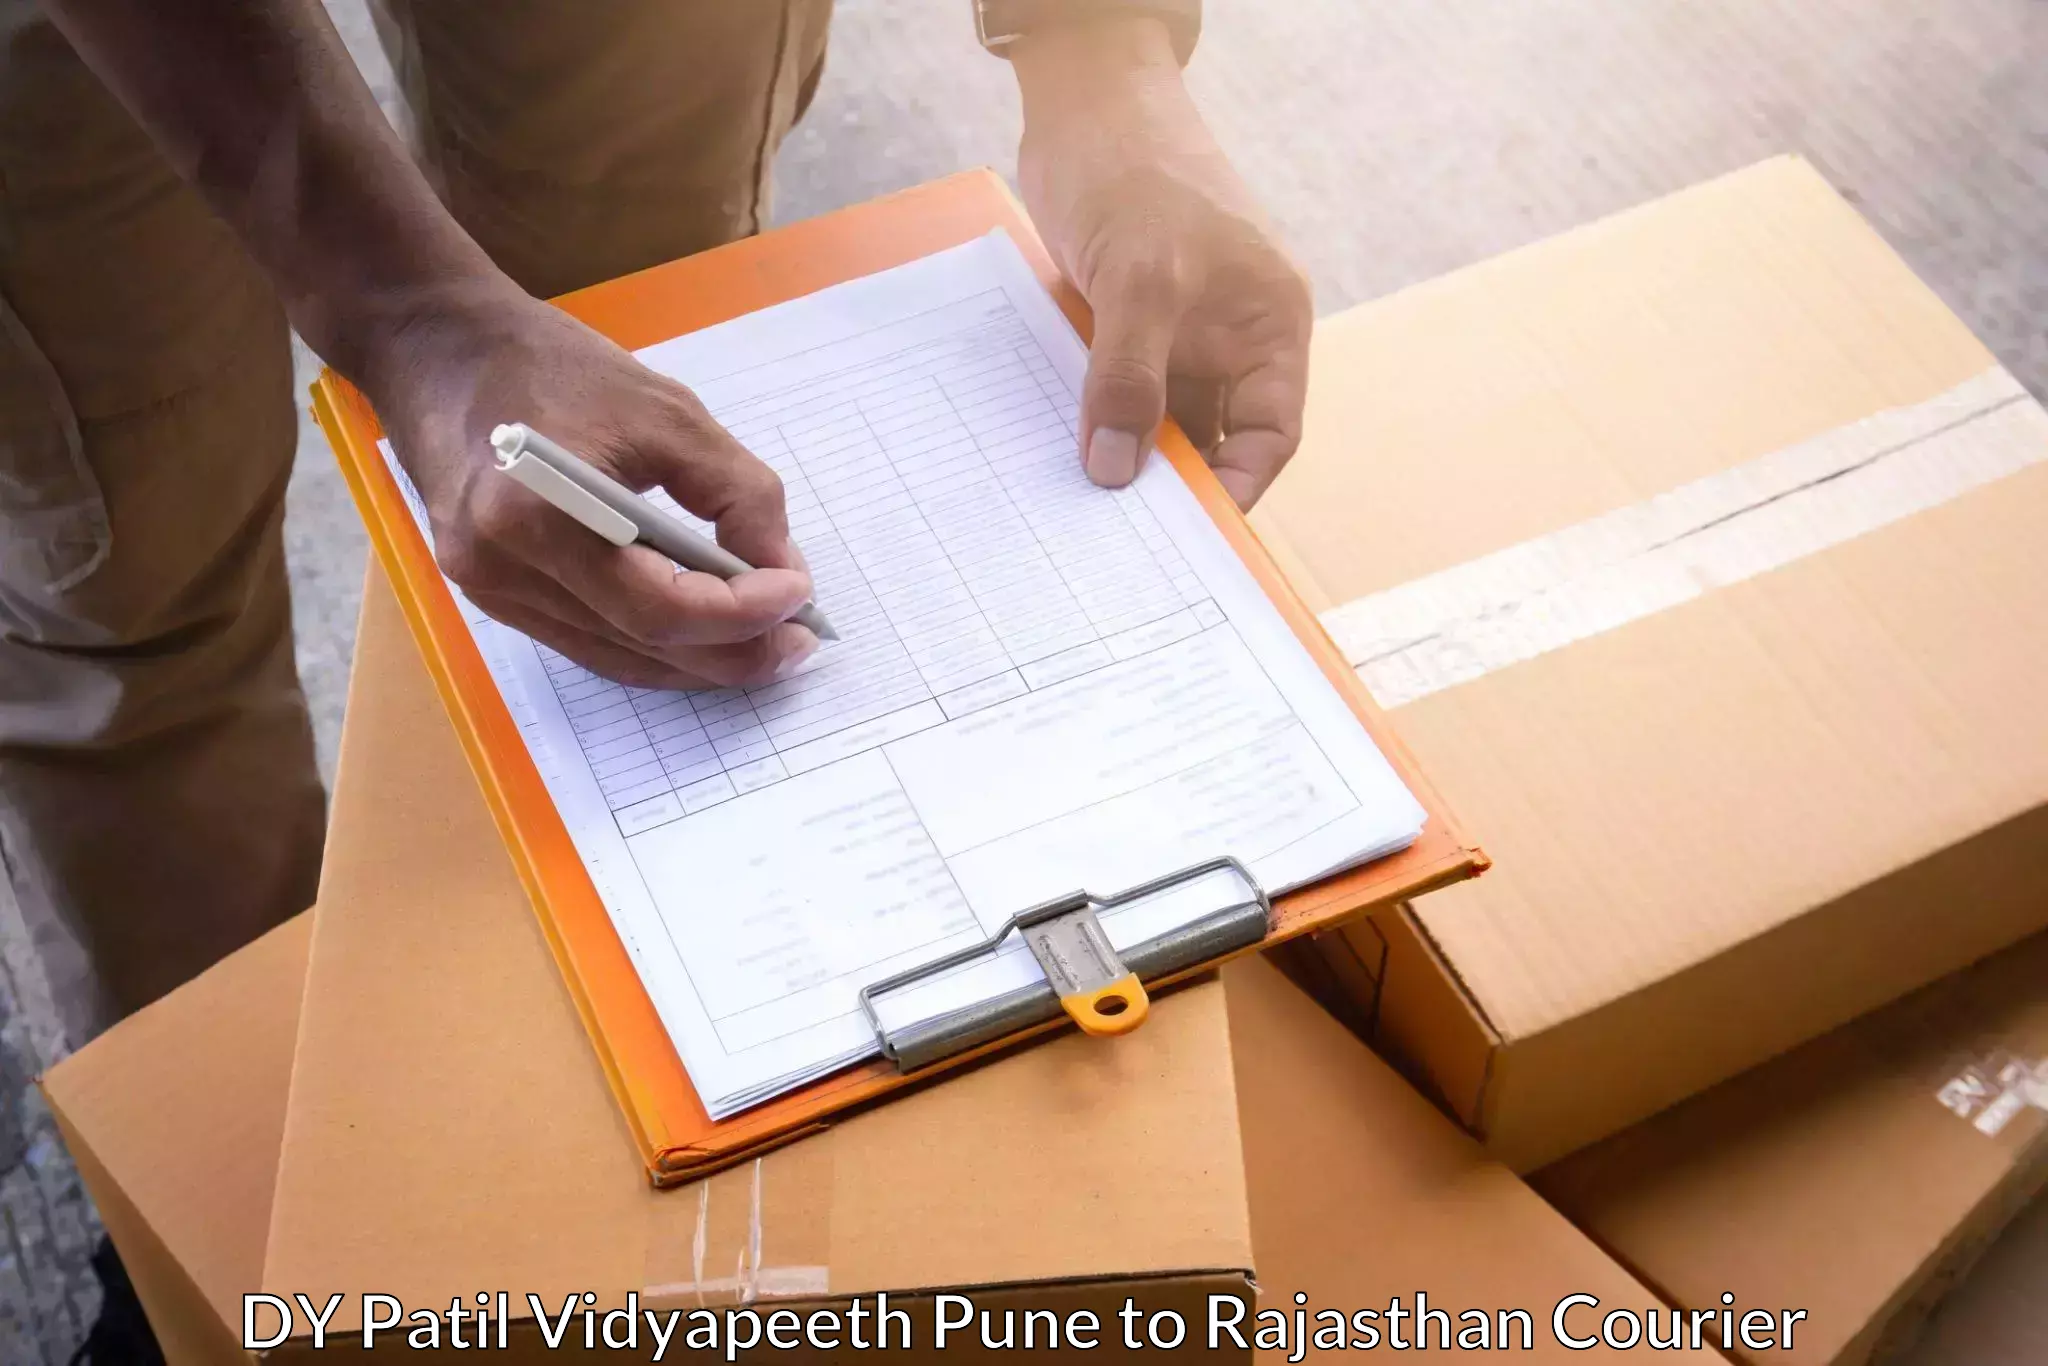 Affordable parcel service in DY Patil Vidyapeeth Pune to IIIT Kota